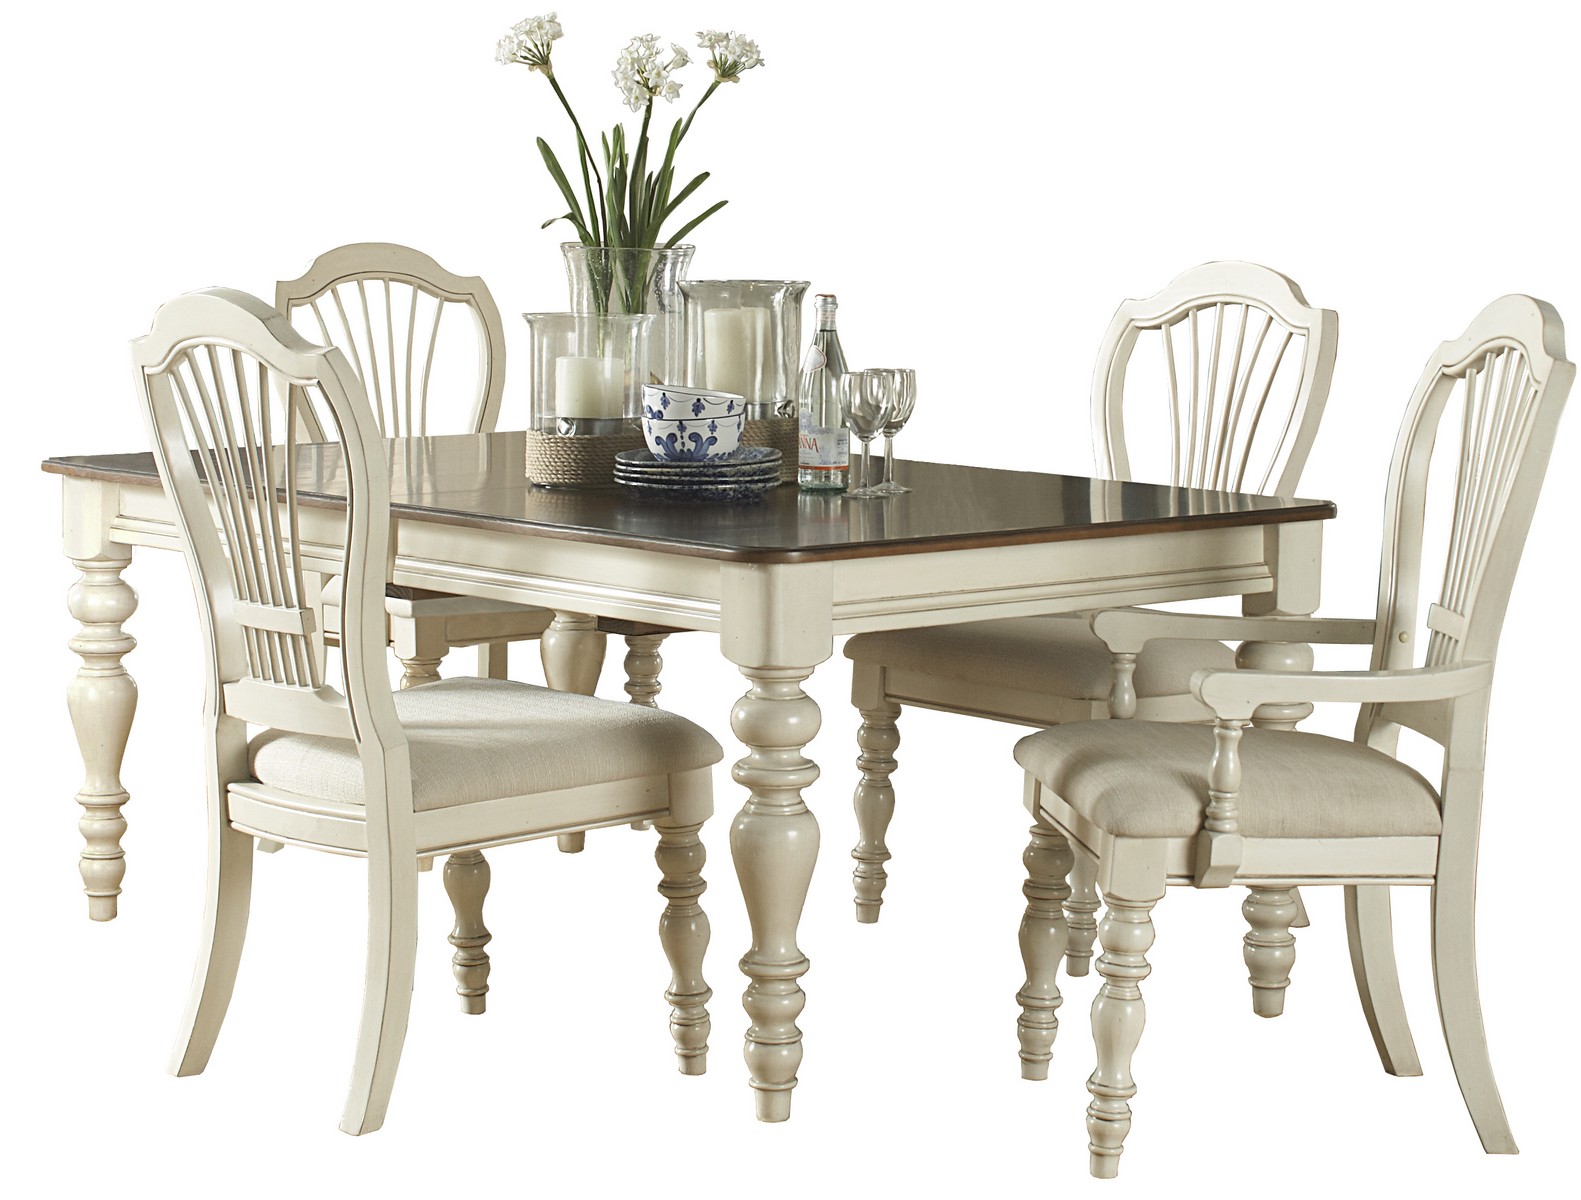 Hillsdale Pine Island 5 PC Dining Set with Wheat Back Chairs - Old White